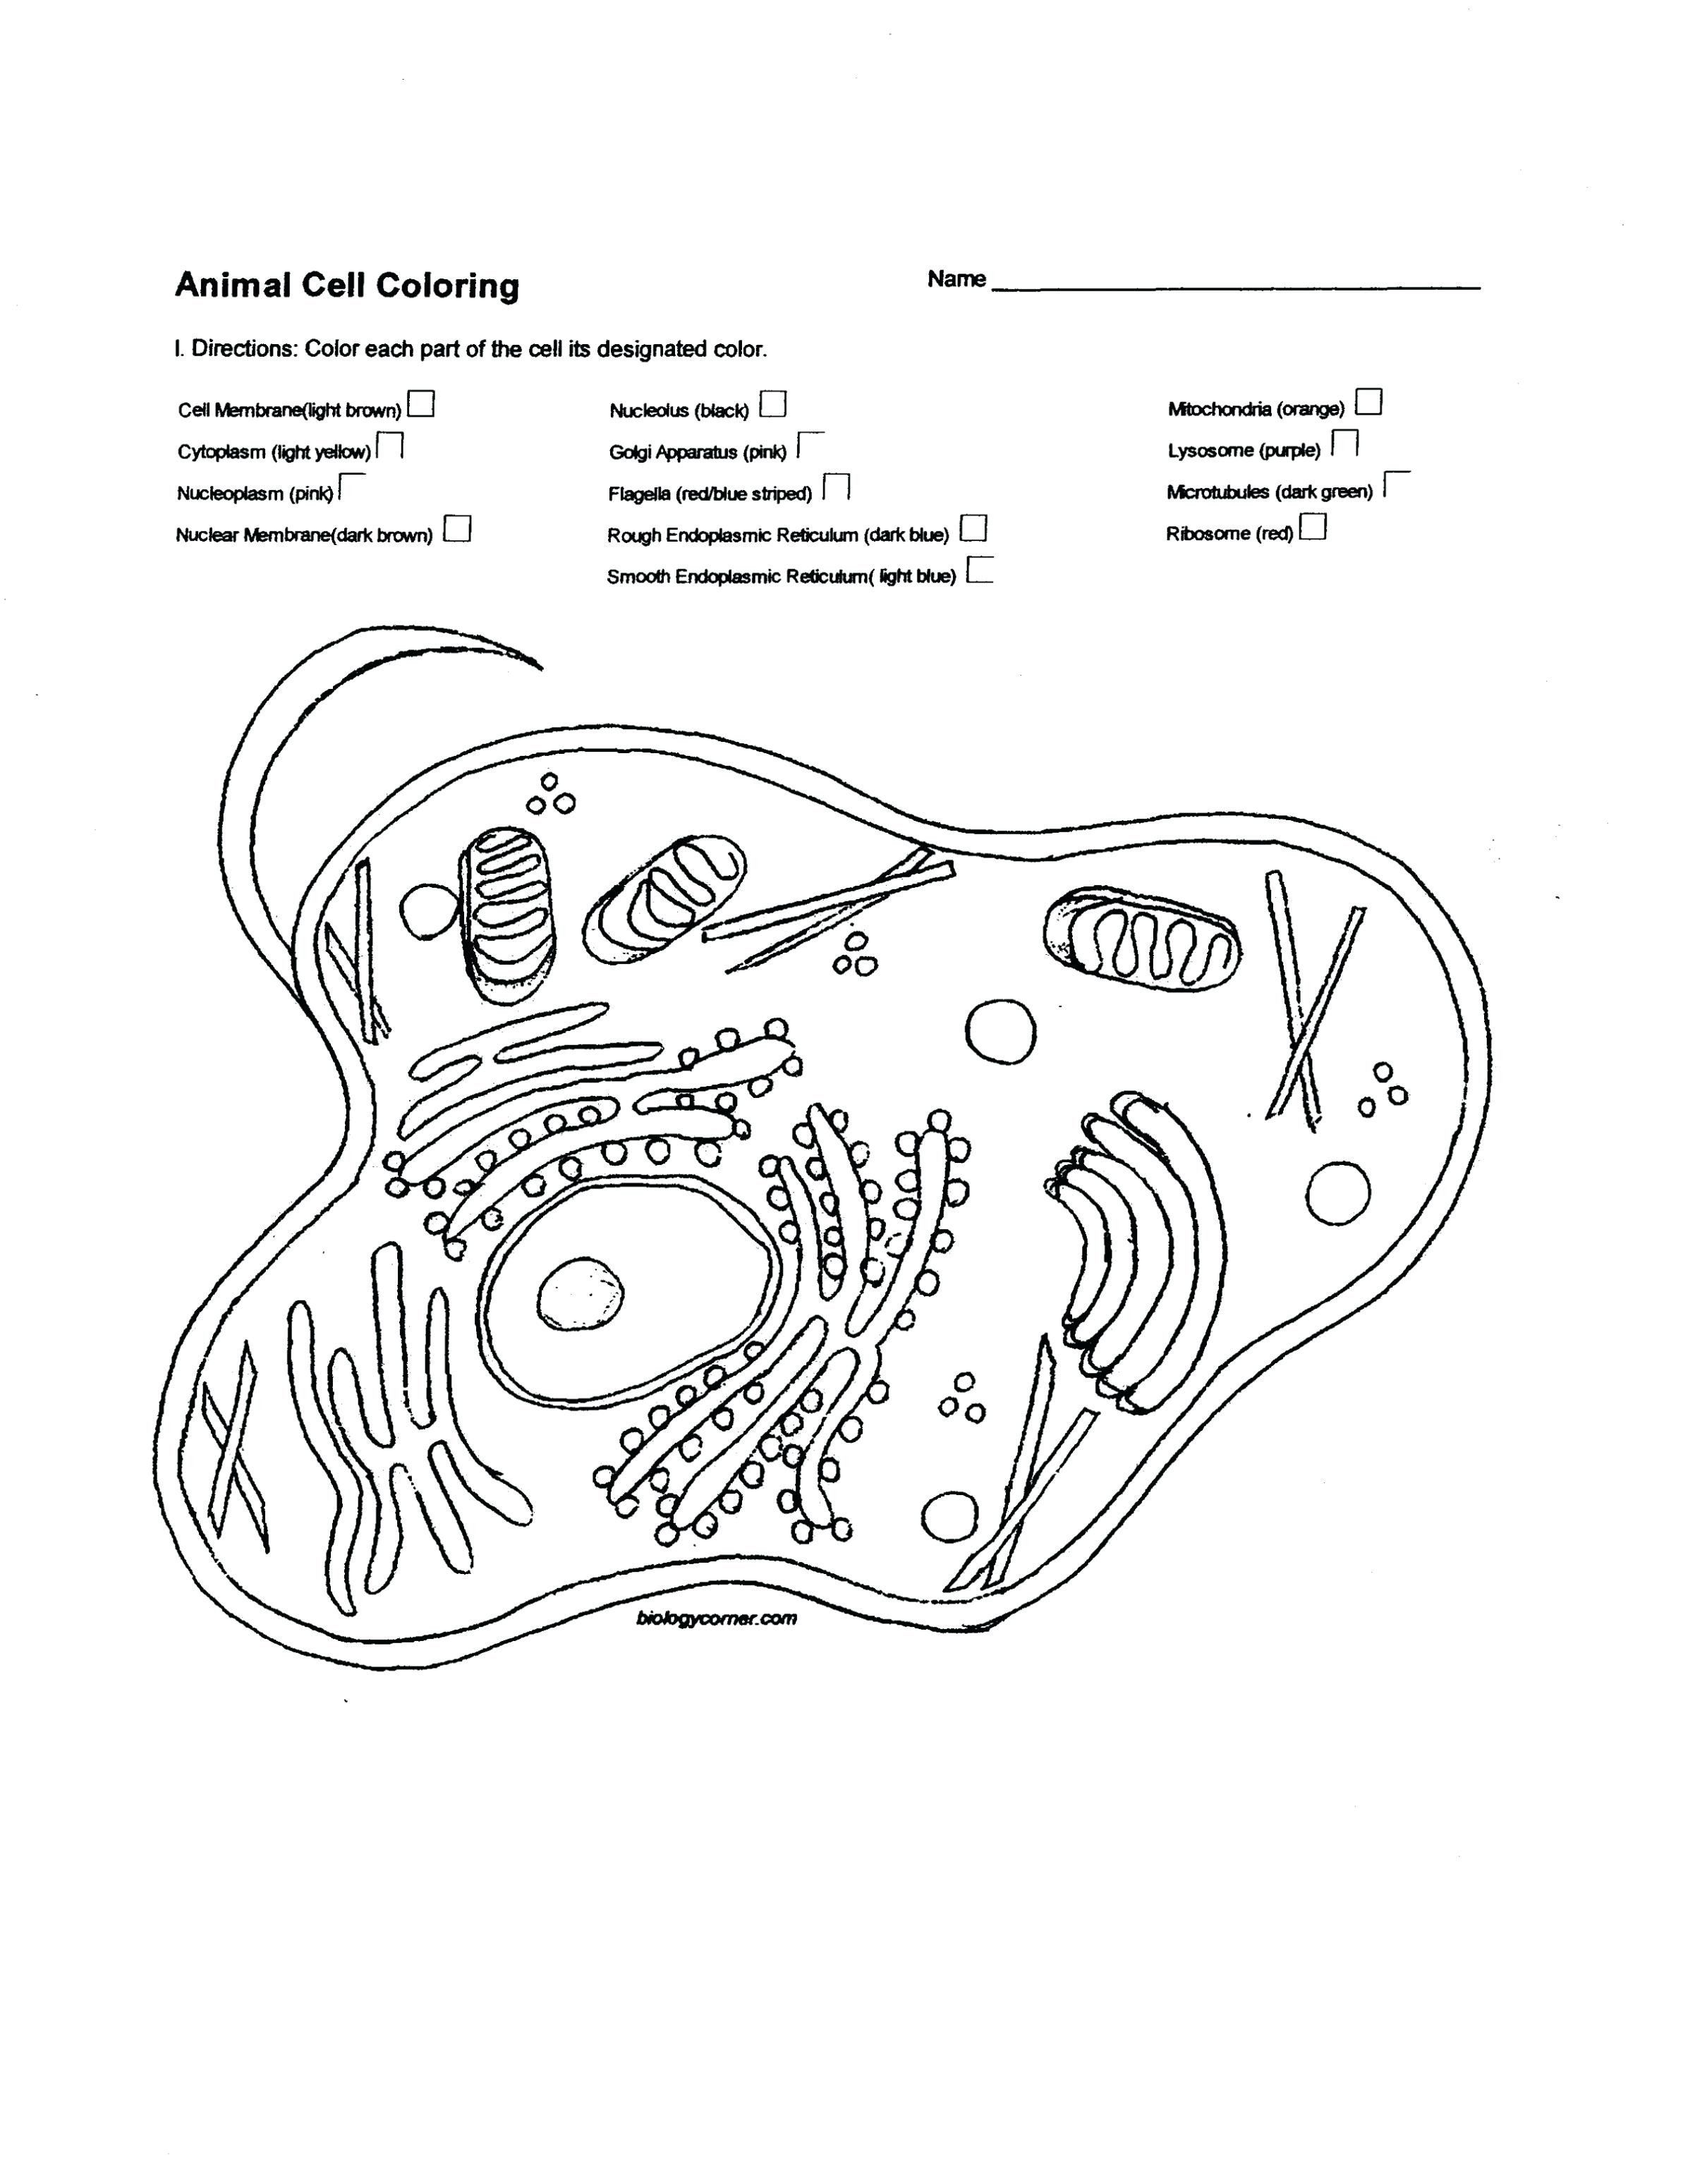 Animal And Plant Cell Coloring Pages - Coloring Home Throughout Animal Cell Coloring Worksheet